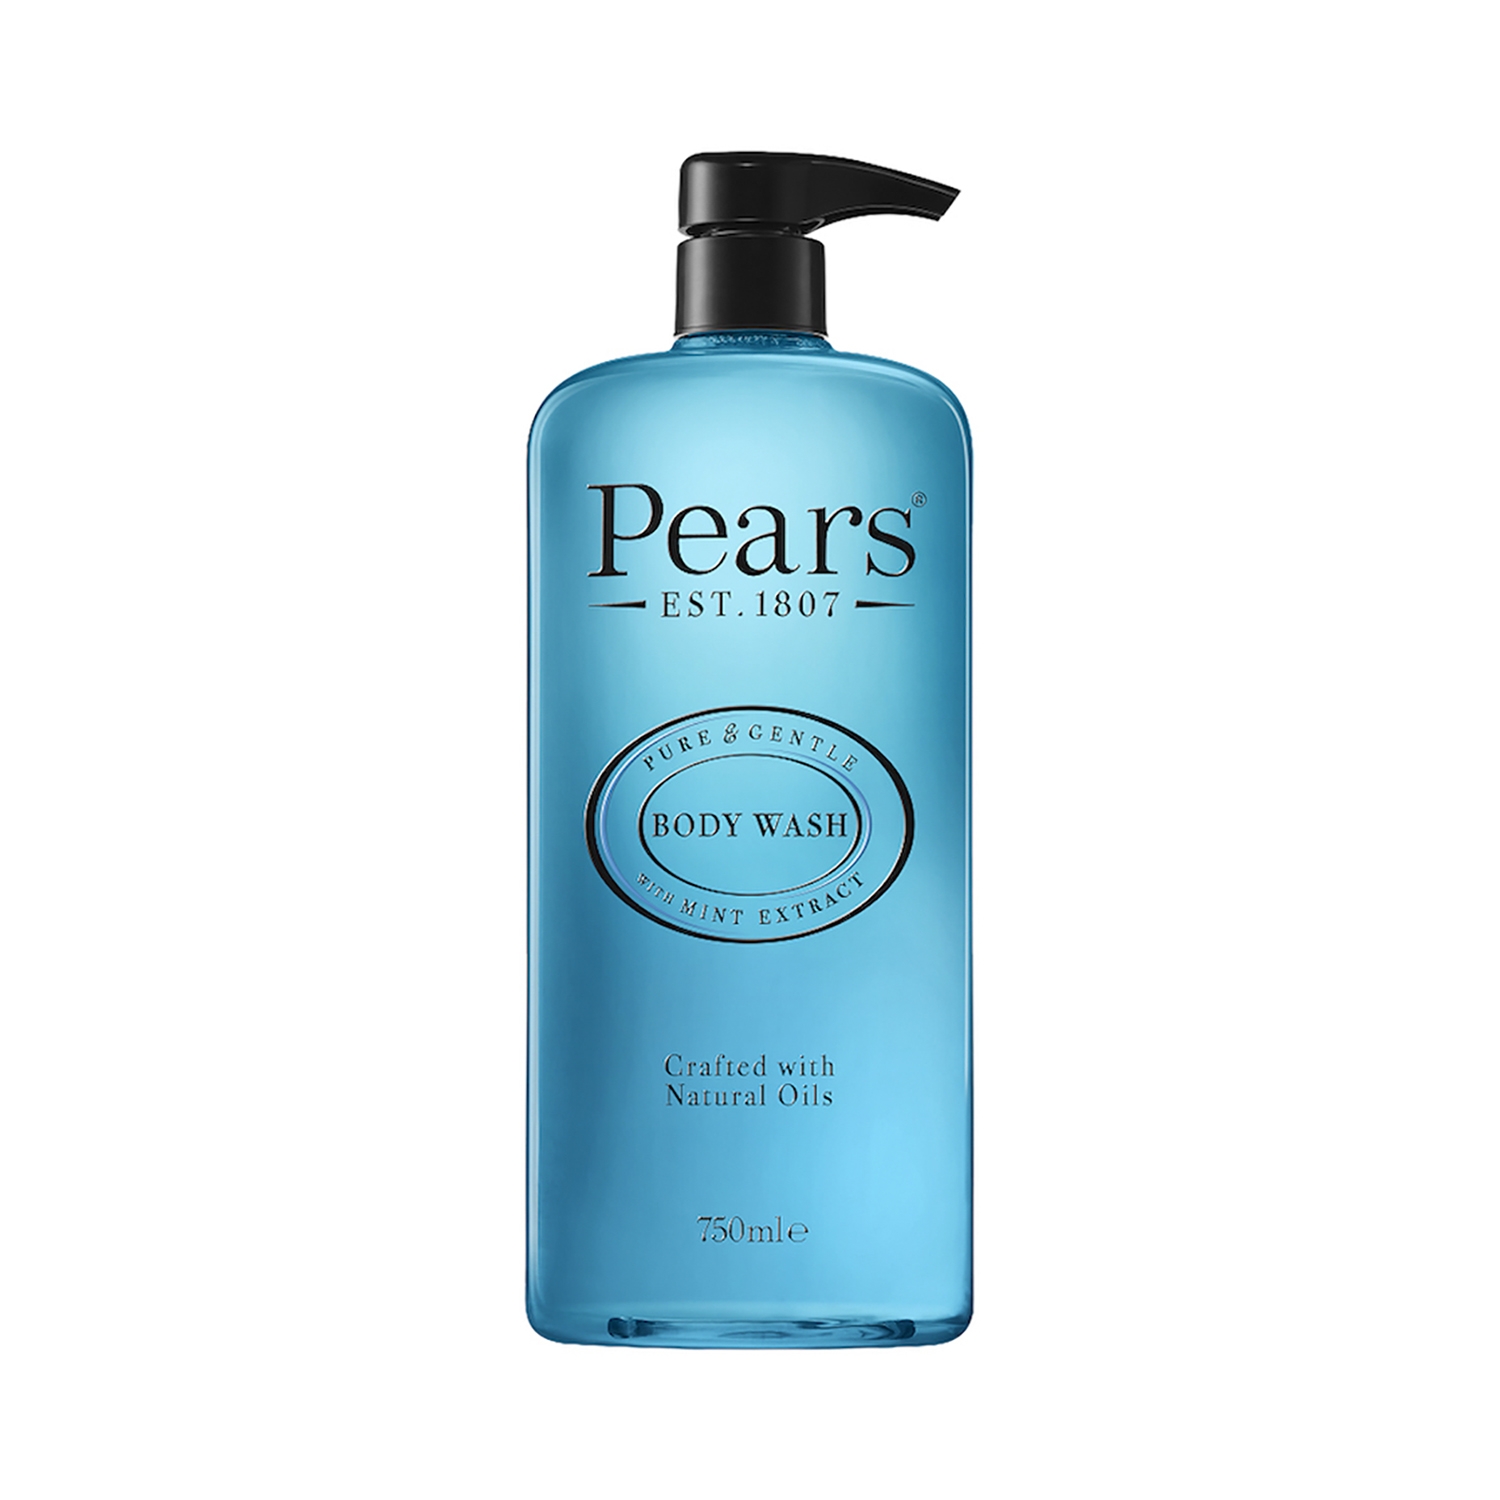 Pears Pure & Gentle Mint Extracts Body Wash (750ml)